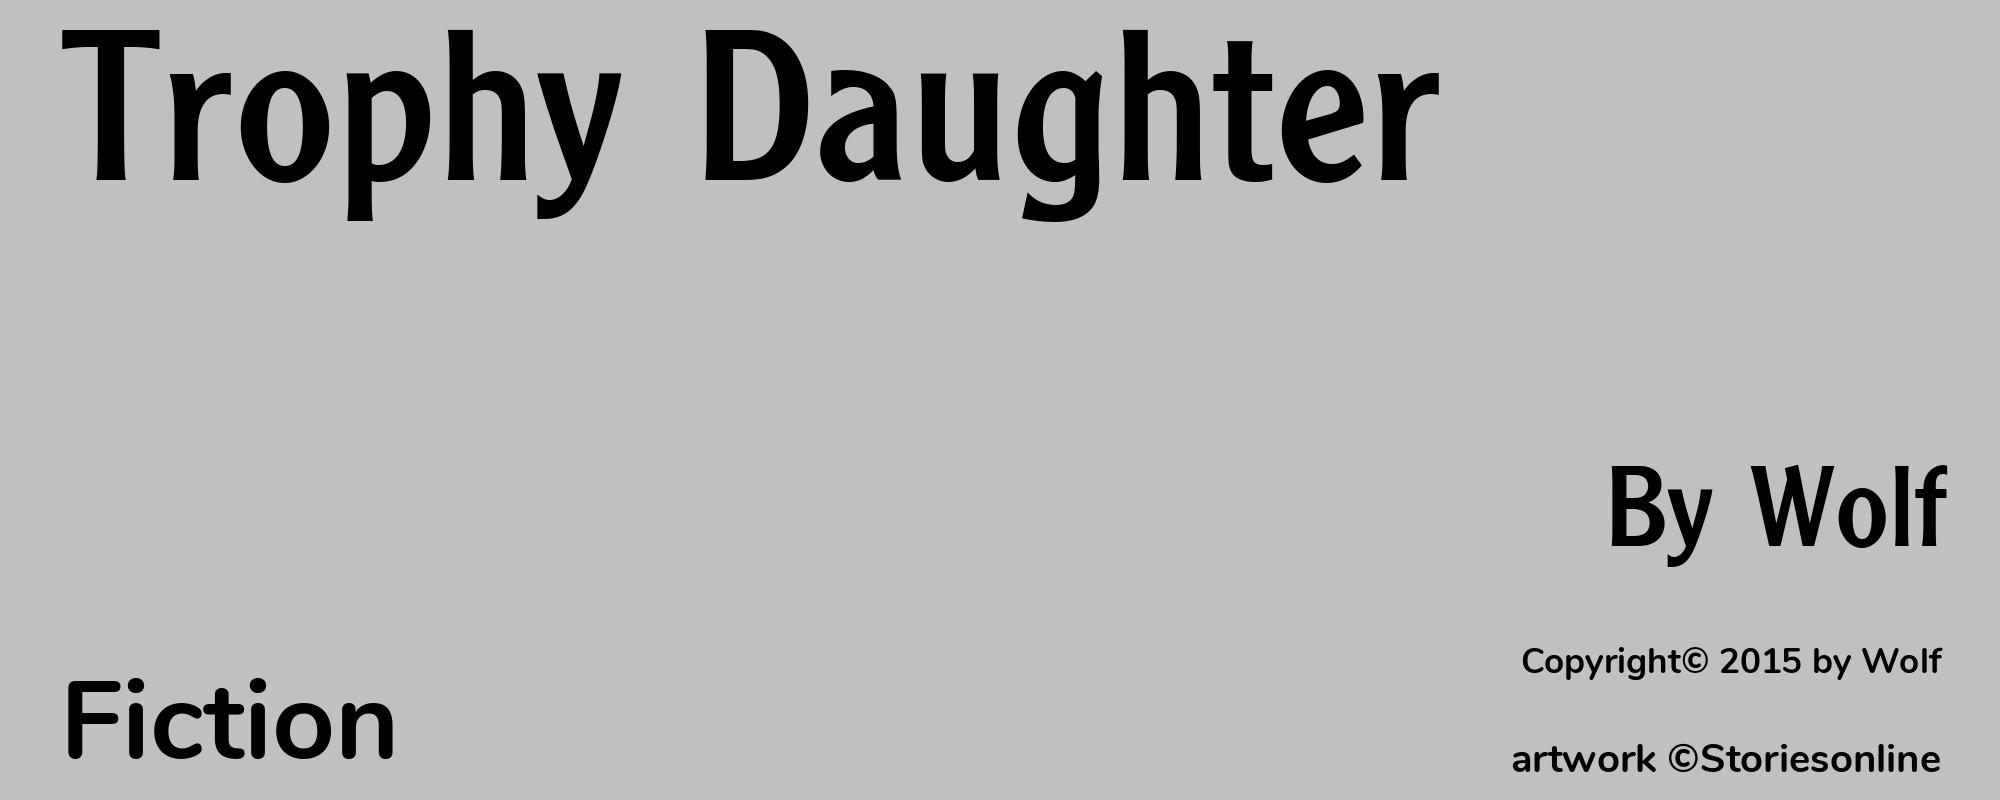 Trophy Daughter - Cover